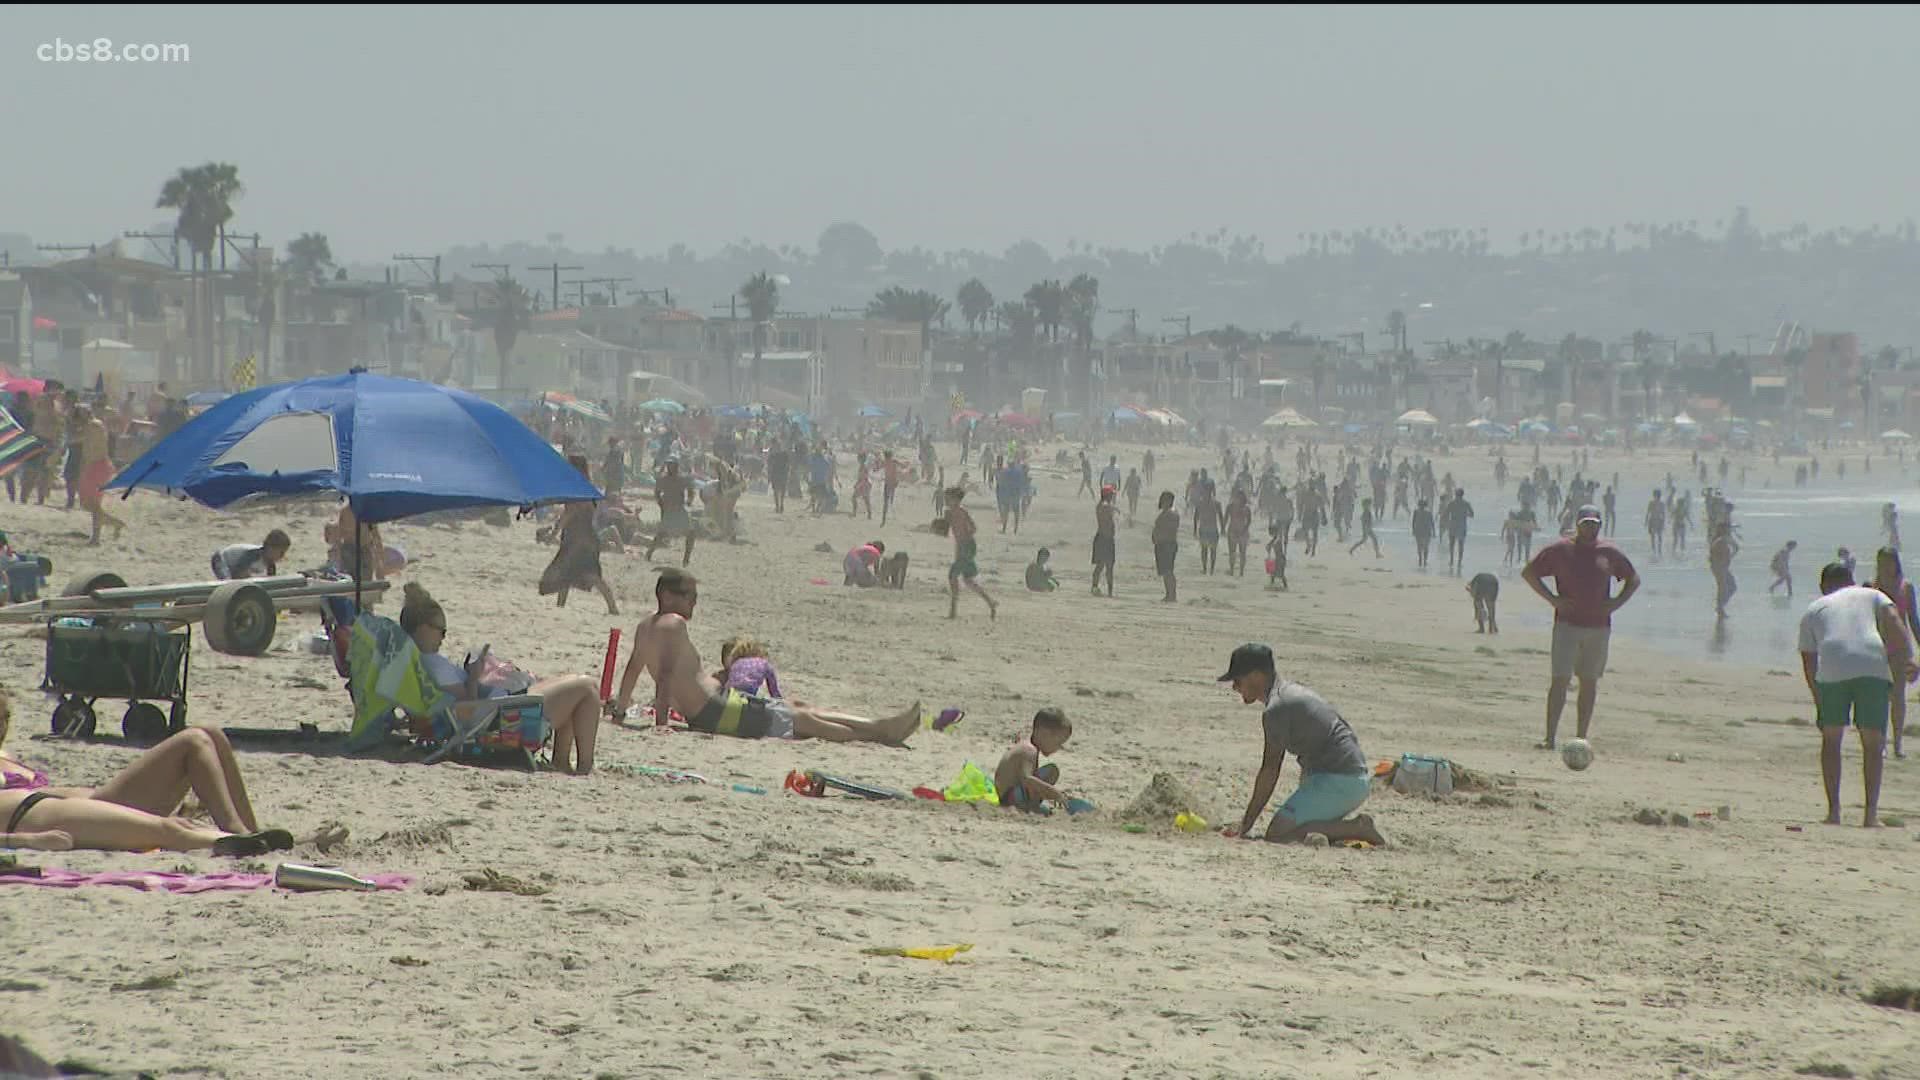 Lifeguards are warning beachgoers to get there early as big crowds are expected for the holiday day weekend, which is also one of their busiest times for rescues.